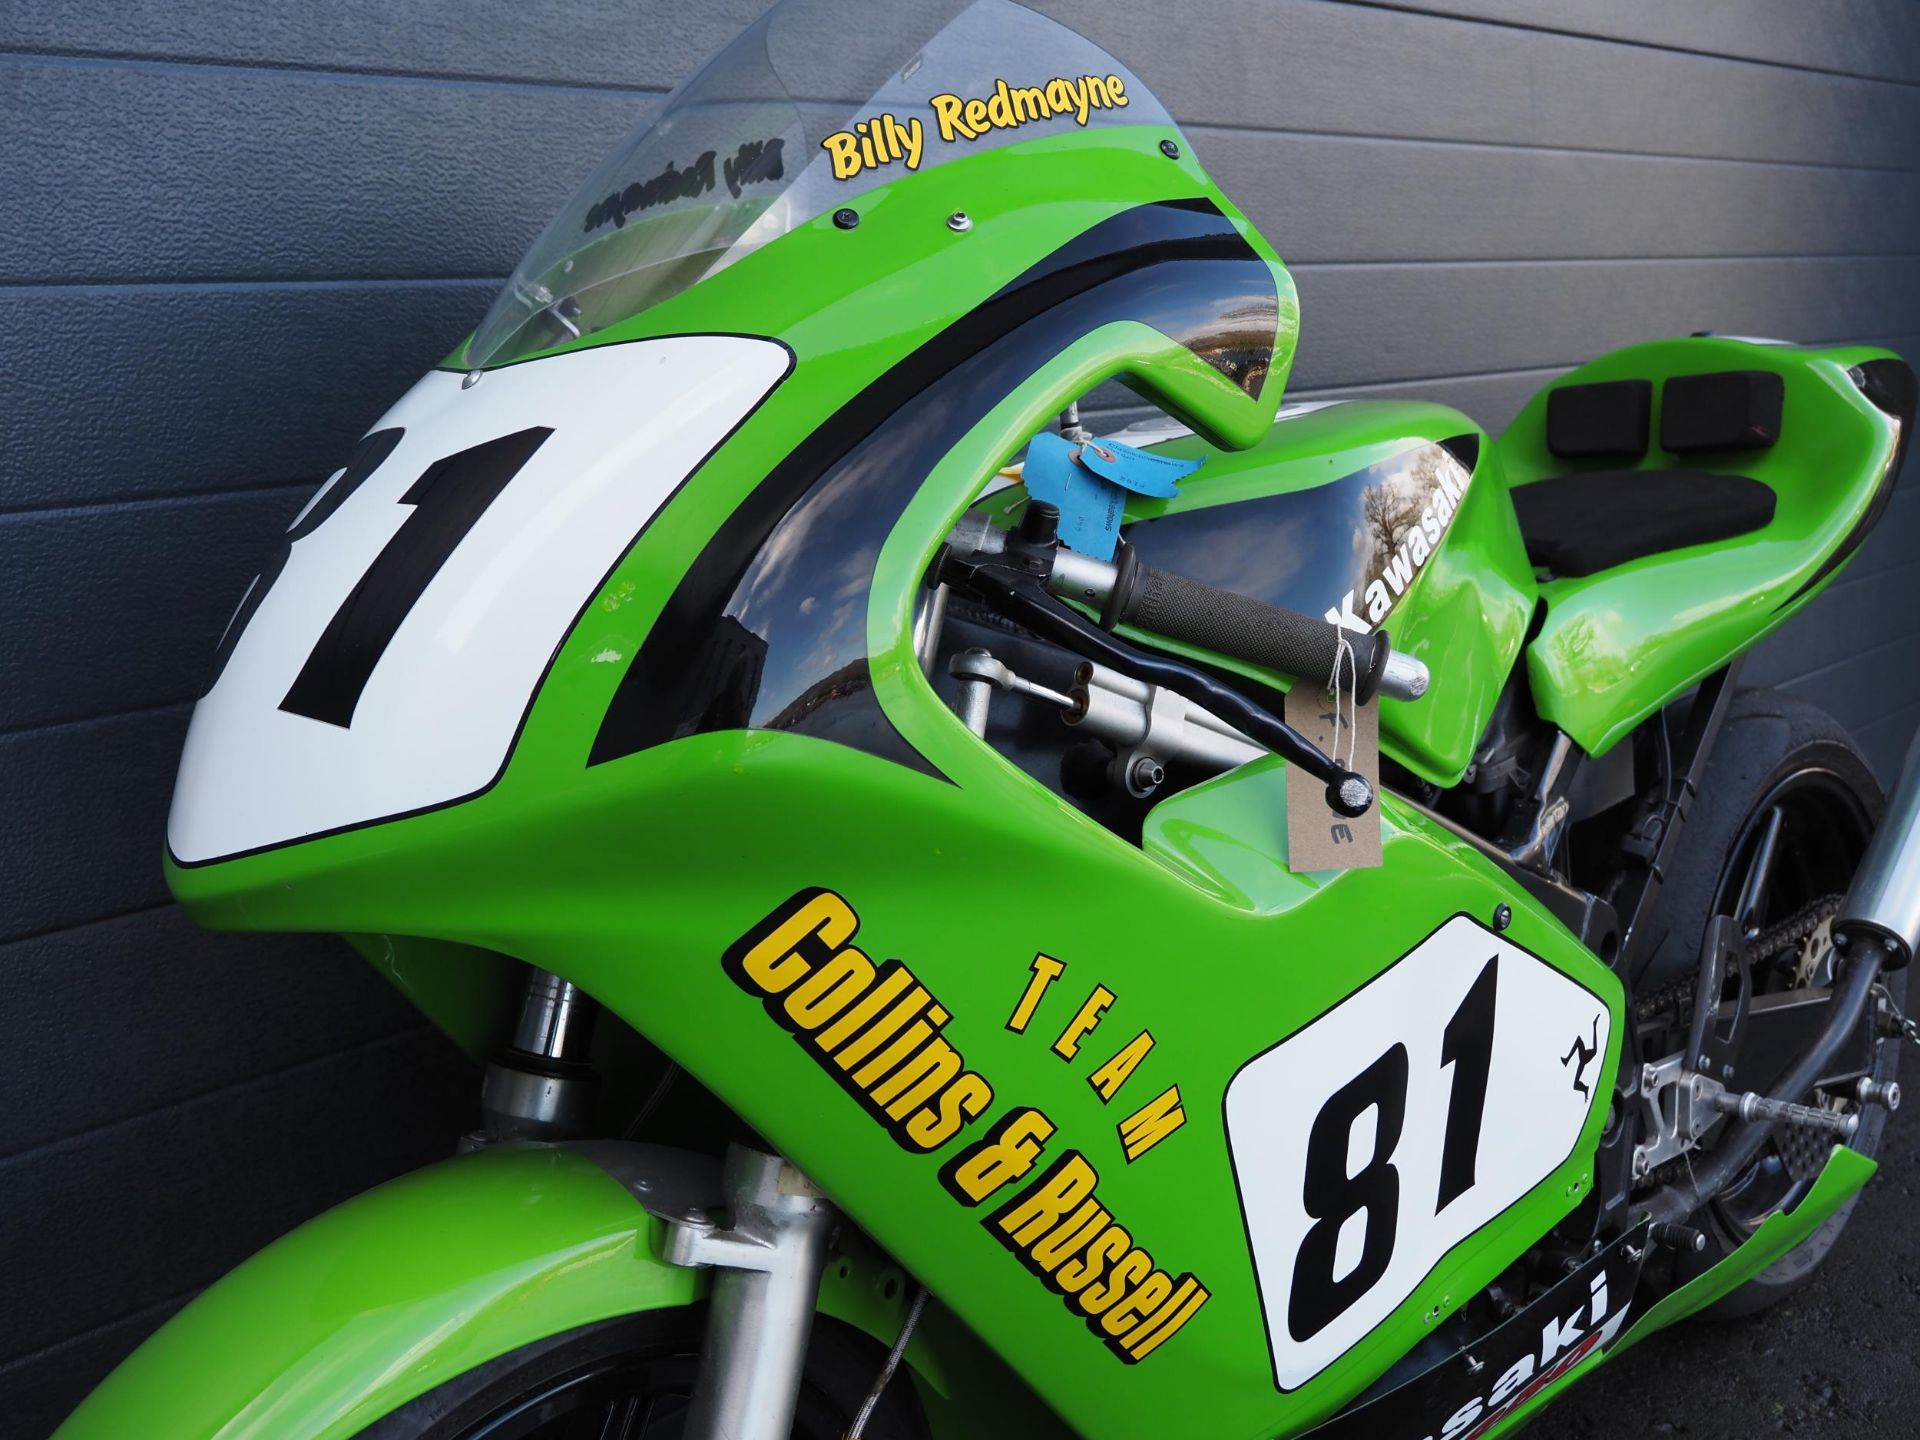 Kawasaki KR1-S 250 F2 motorcycle. 1992 This bike was ridden by Billy Redmayne at the 2015 Classic F2 - Bild 8 aus 8